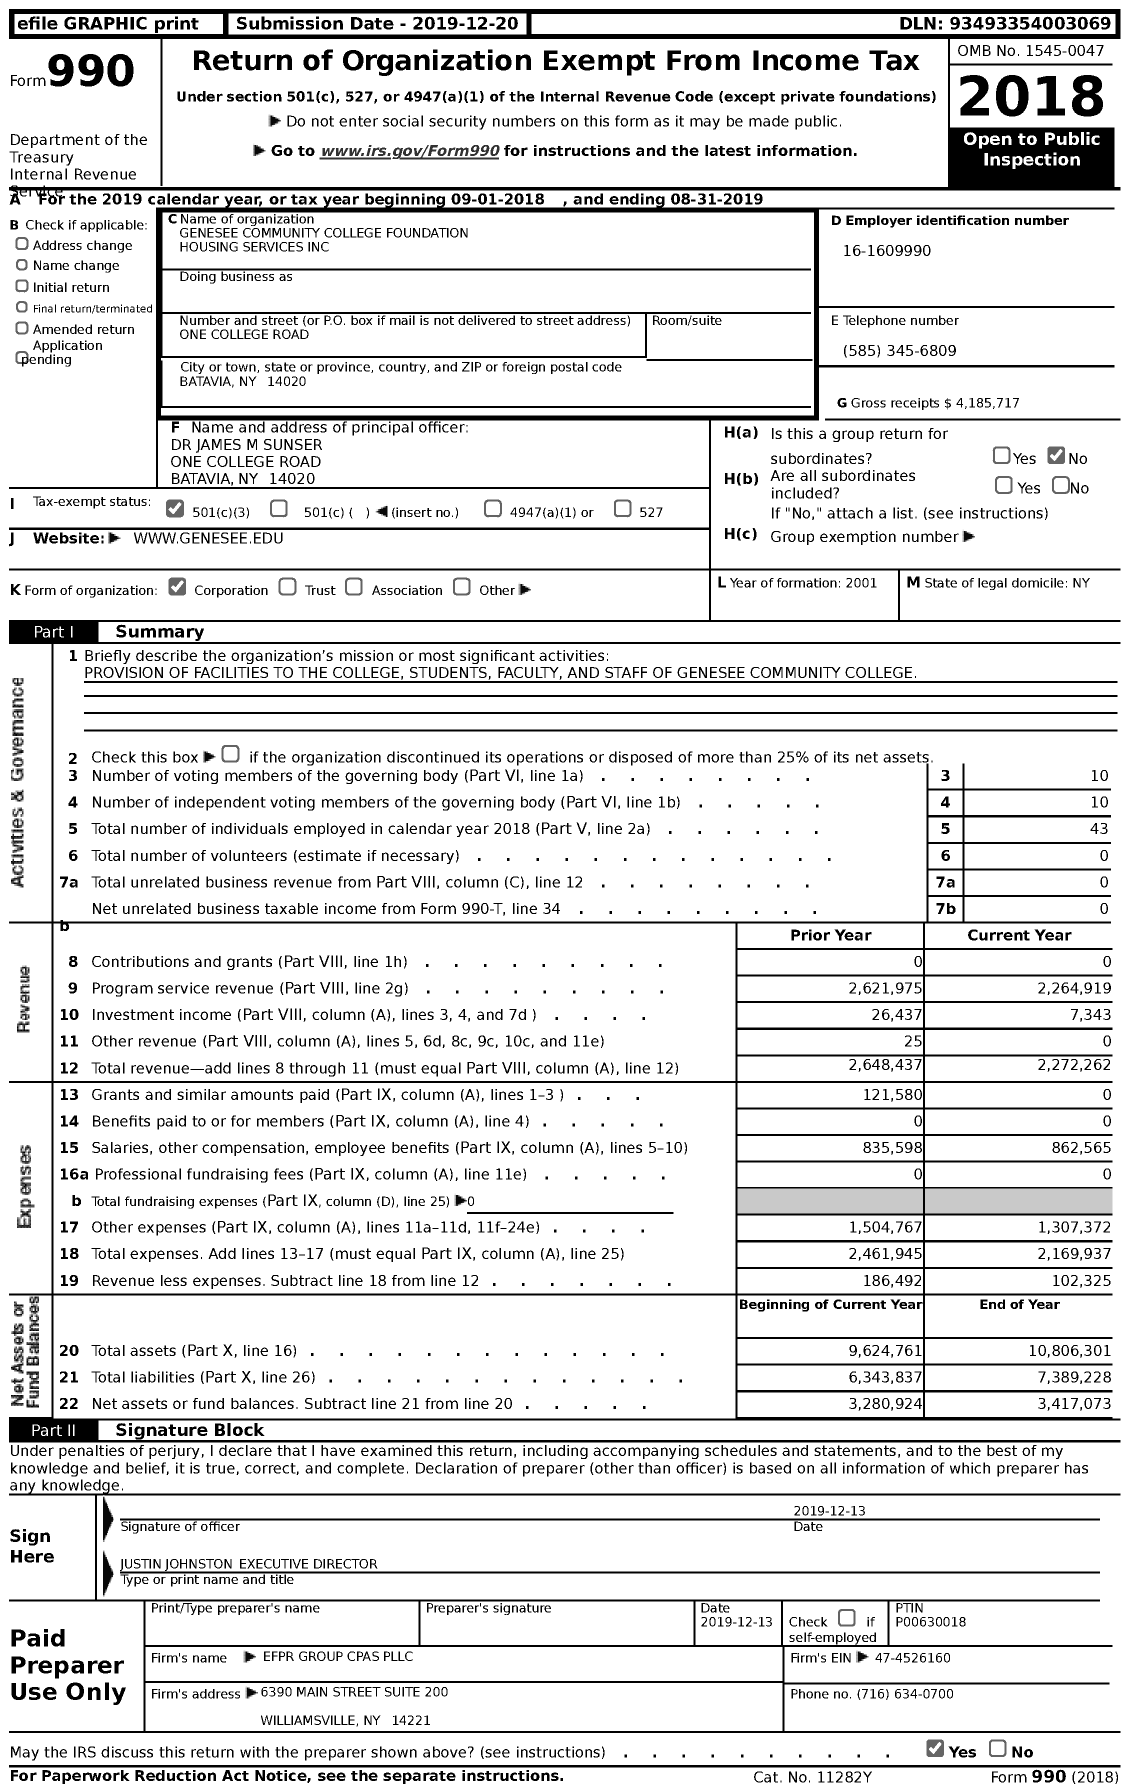 Image of first page of 2018 Form 990 for Genesee Community College Foundation Housing Services